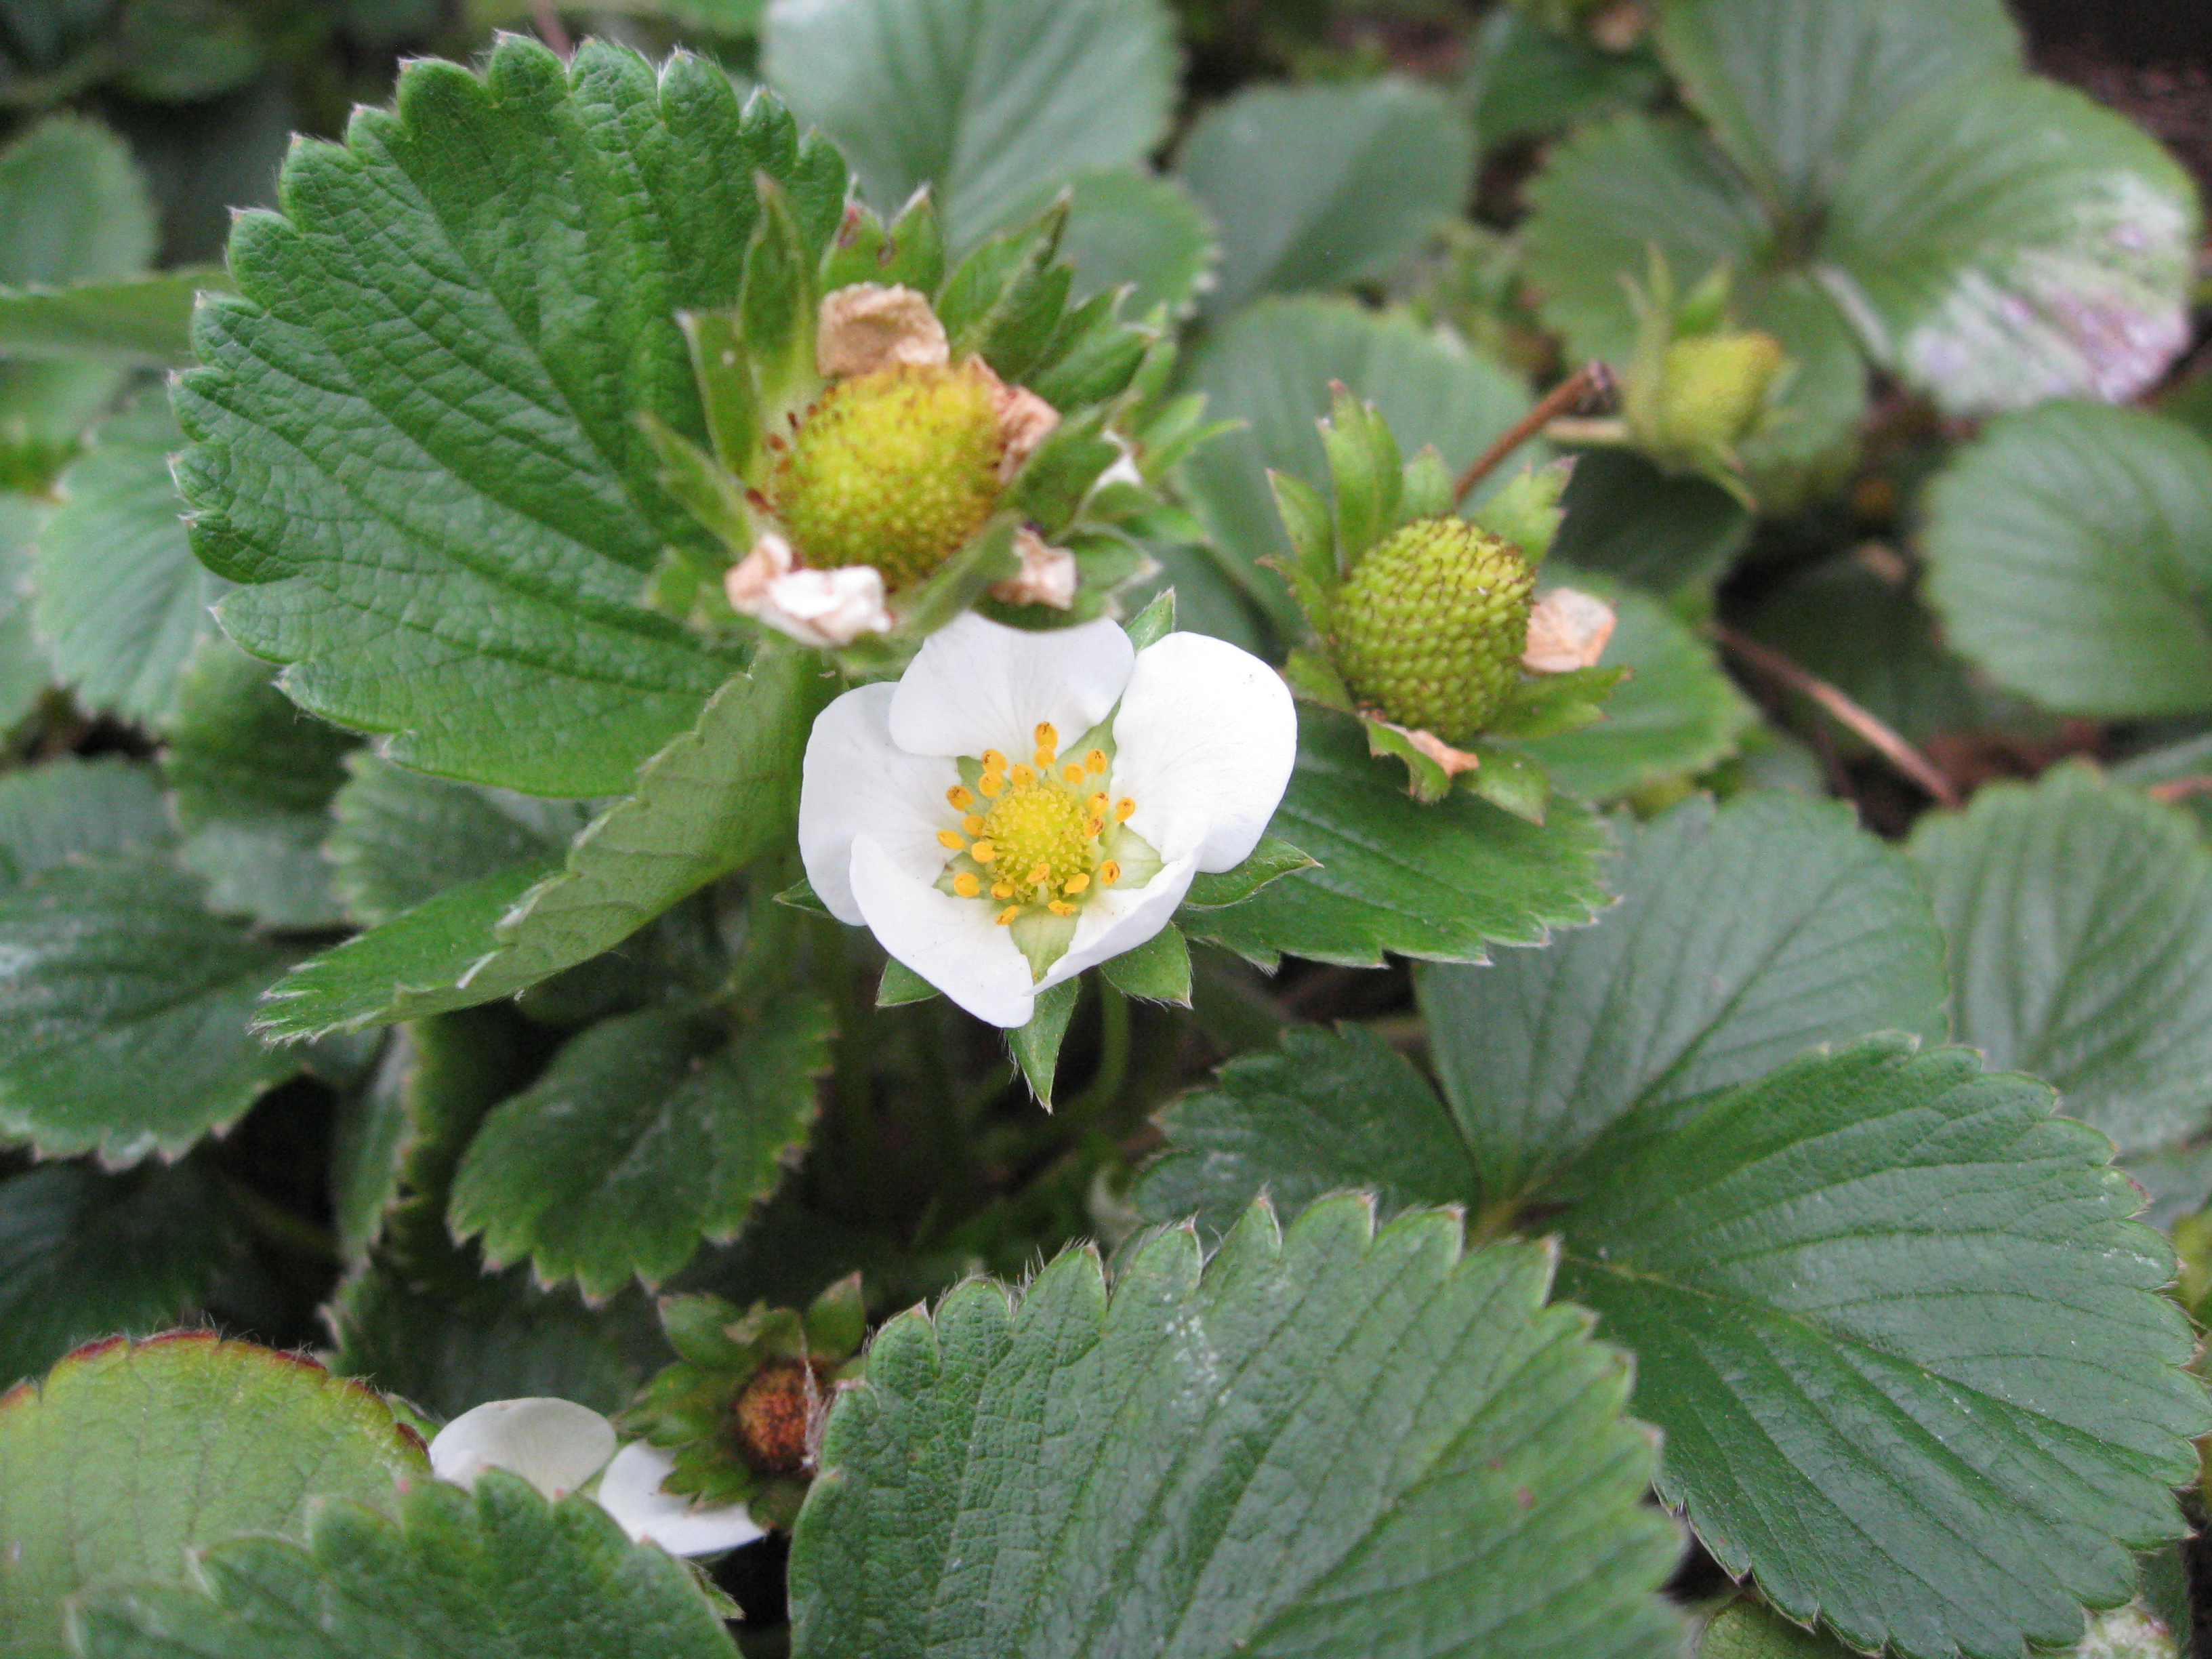 Strawberries are flowering and setting fruit.